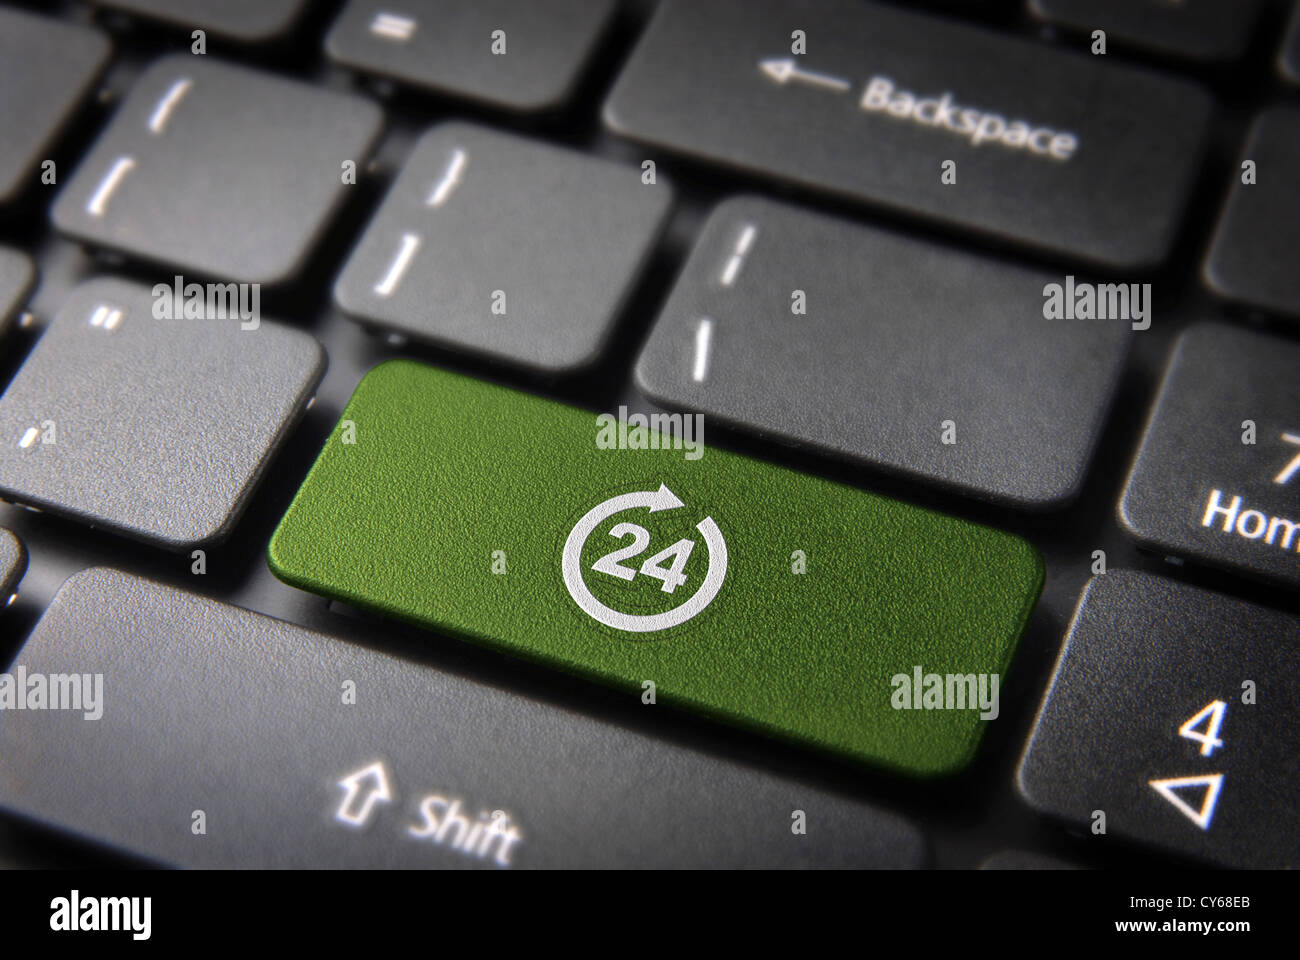 Online business always open concept: green key with 24 working hours symbol on laptop keyboard. Included clipping path, so you can easily edit it. Stock Photo